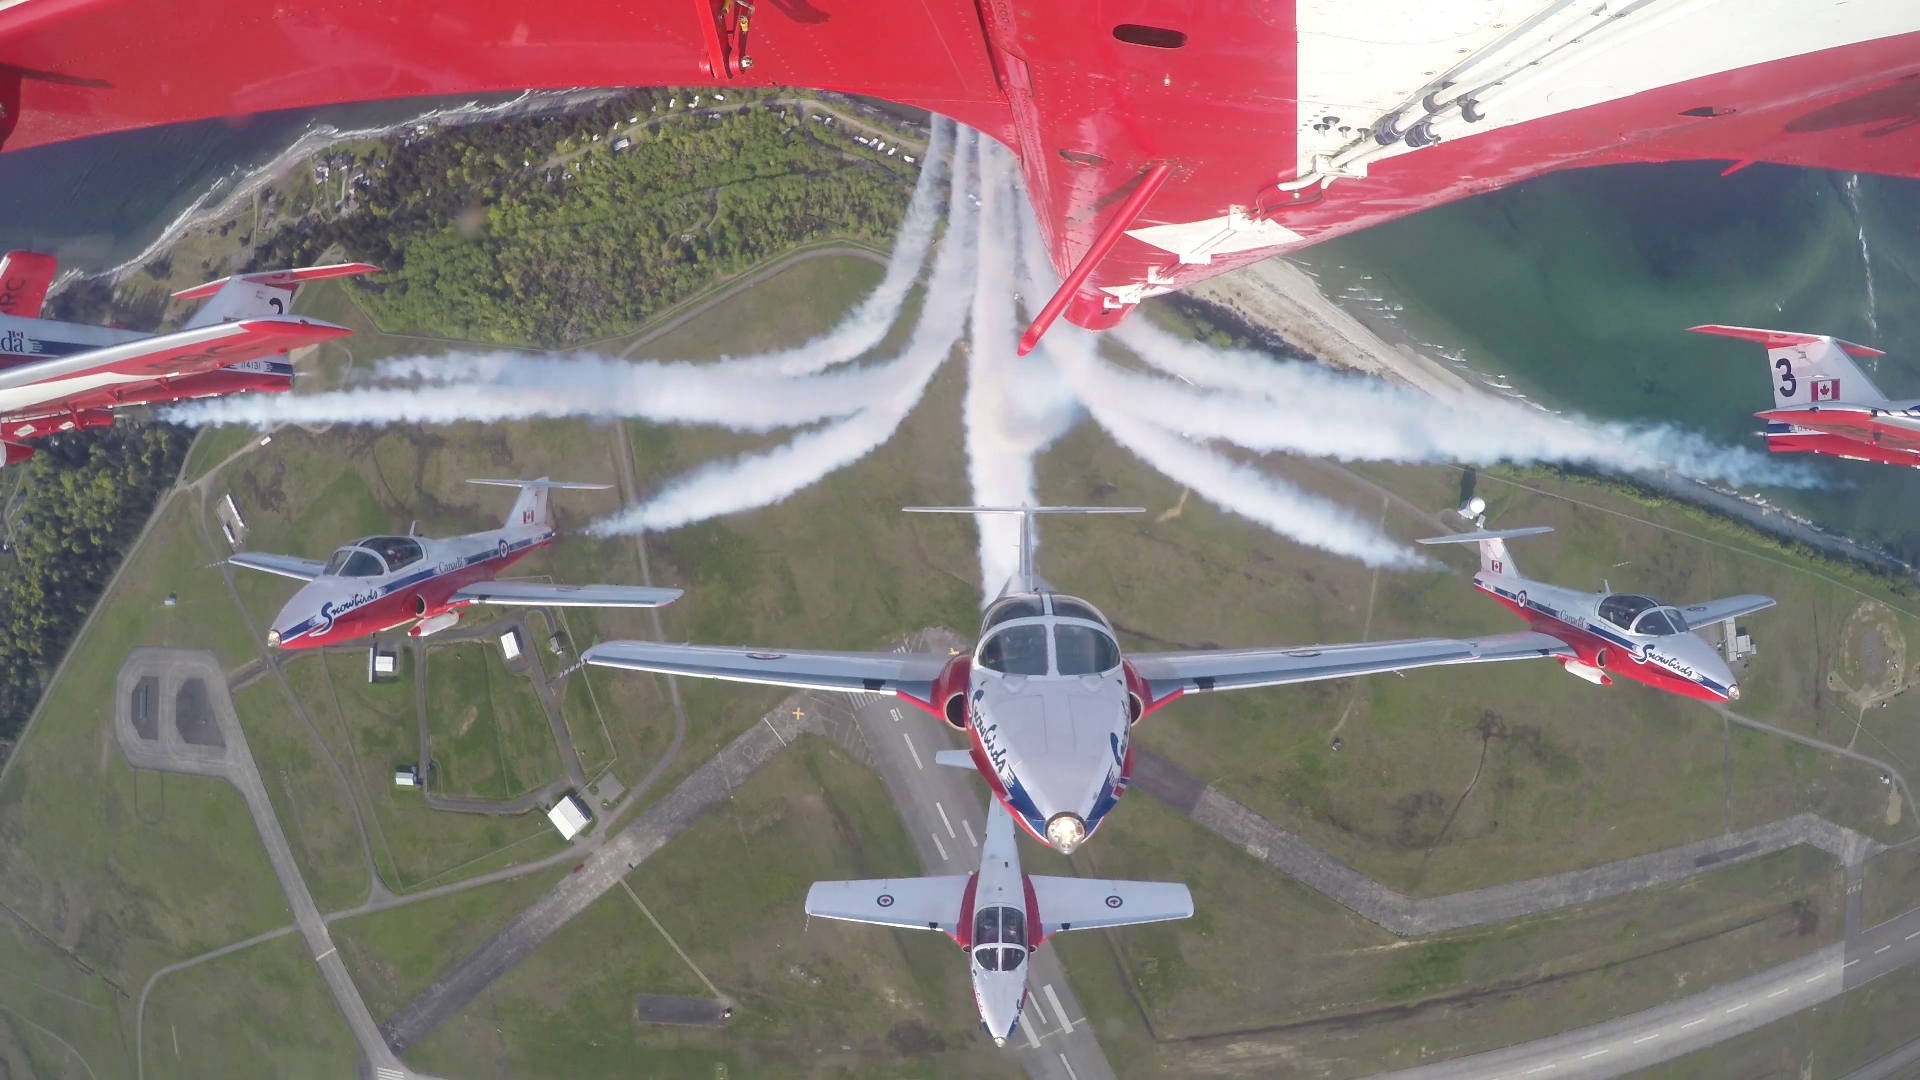 The Canadian Forces Snowbirds are scheduled to appear at EAA AirVenture Oshkosh 2016.